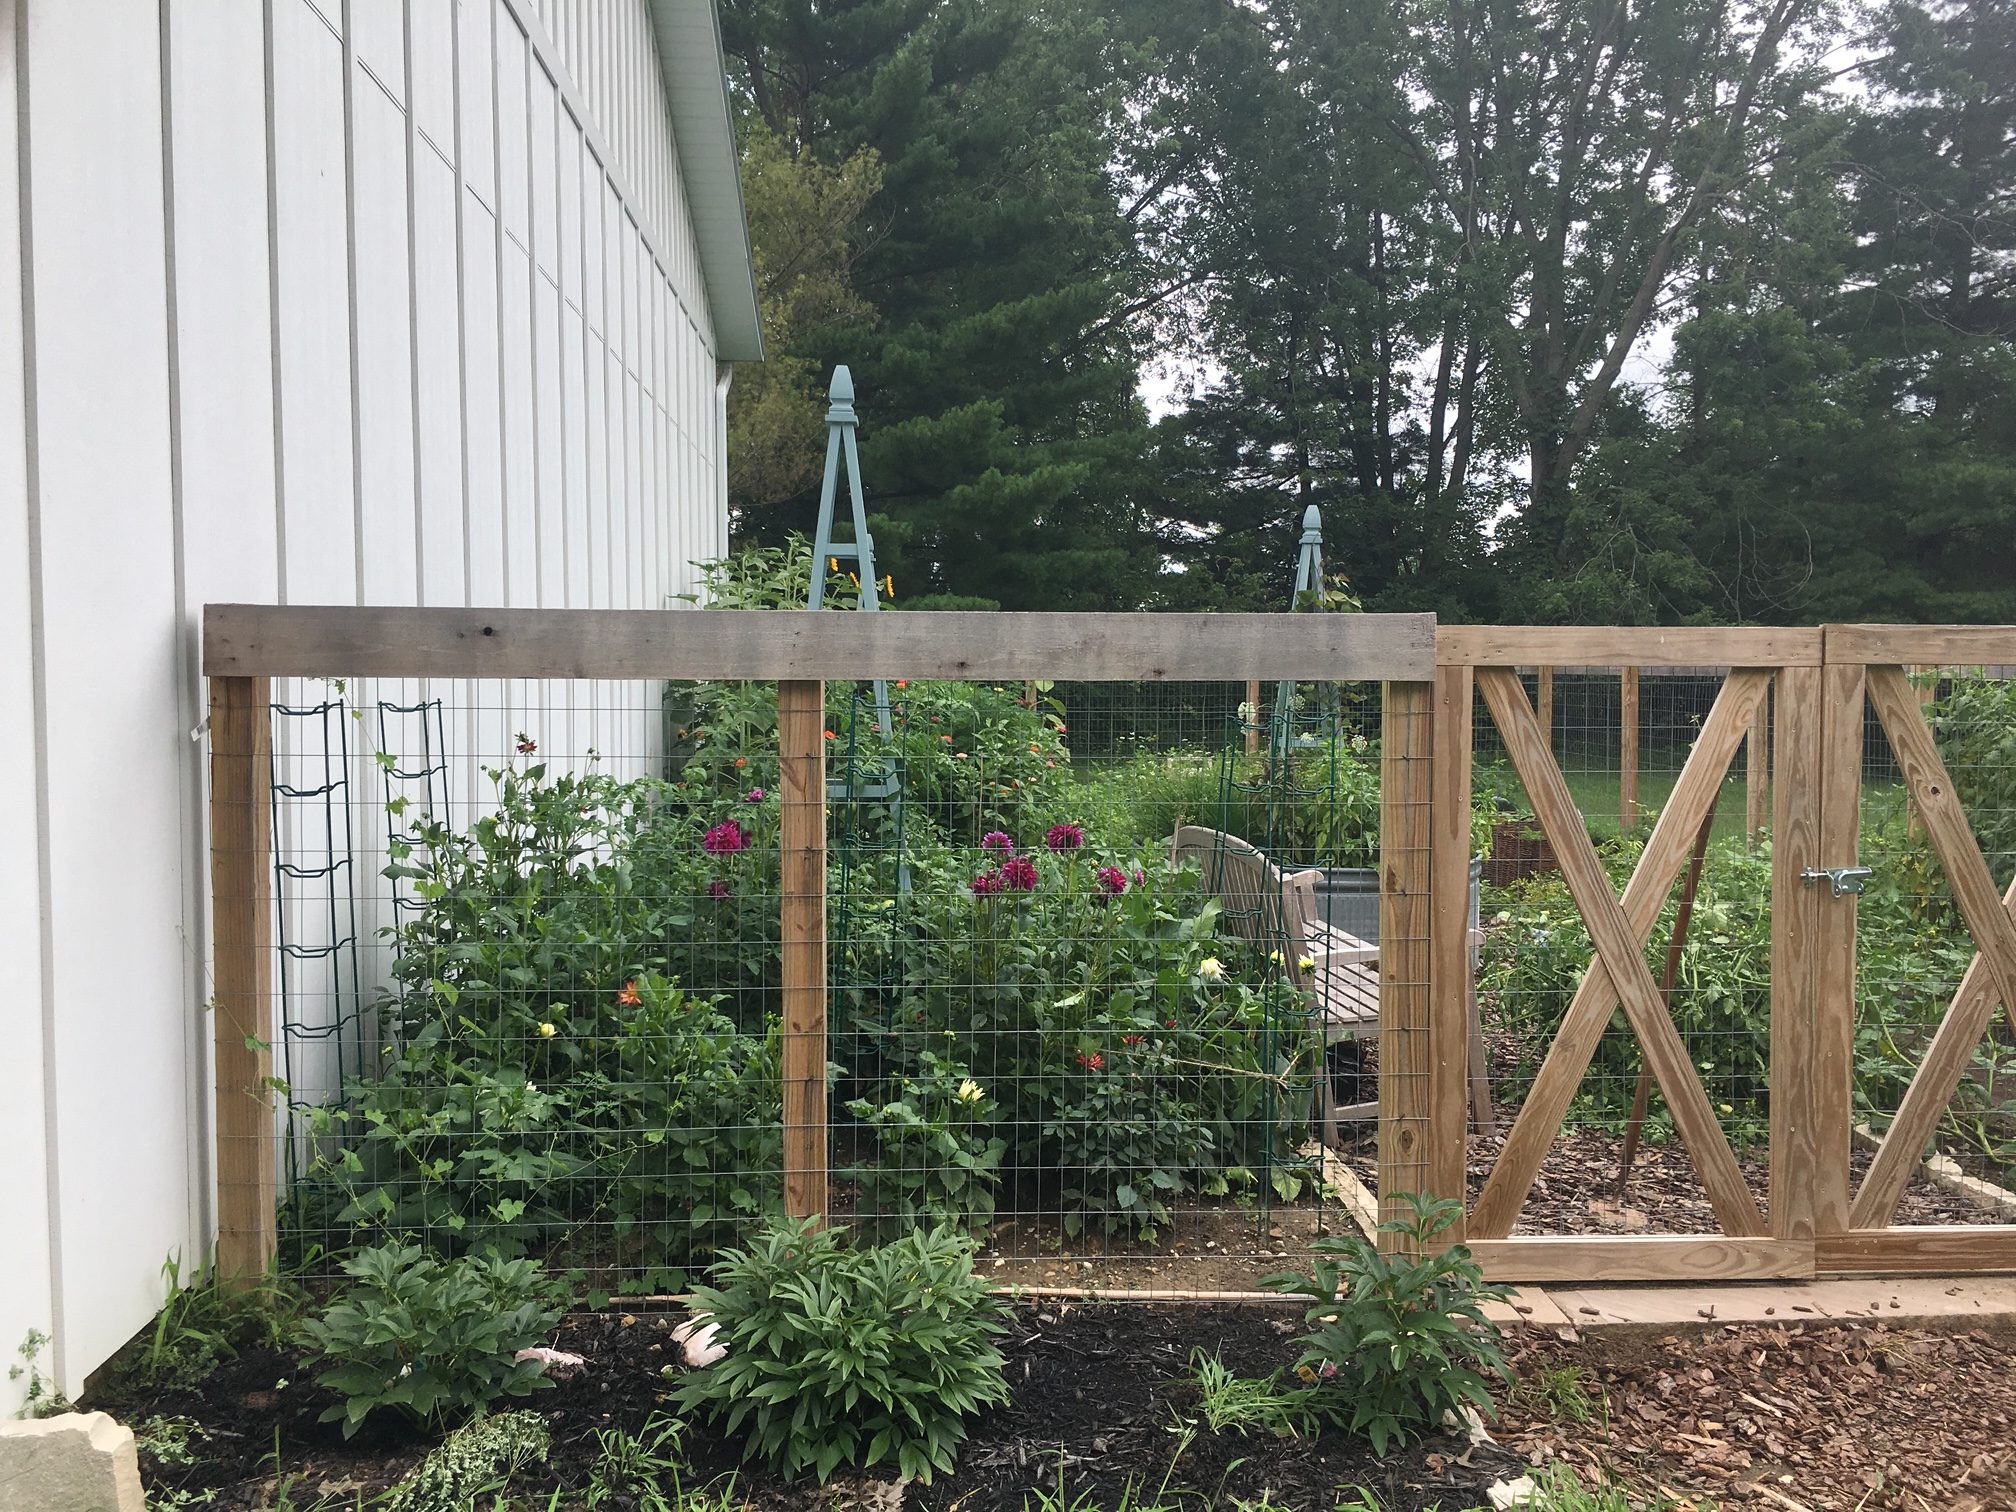 Our Veggie Garden at Home - Thinking Outside the Boxwood